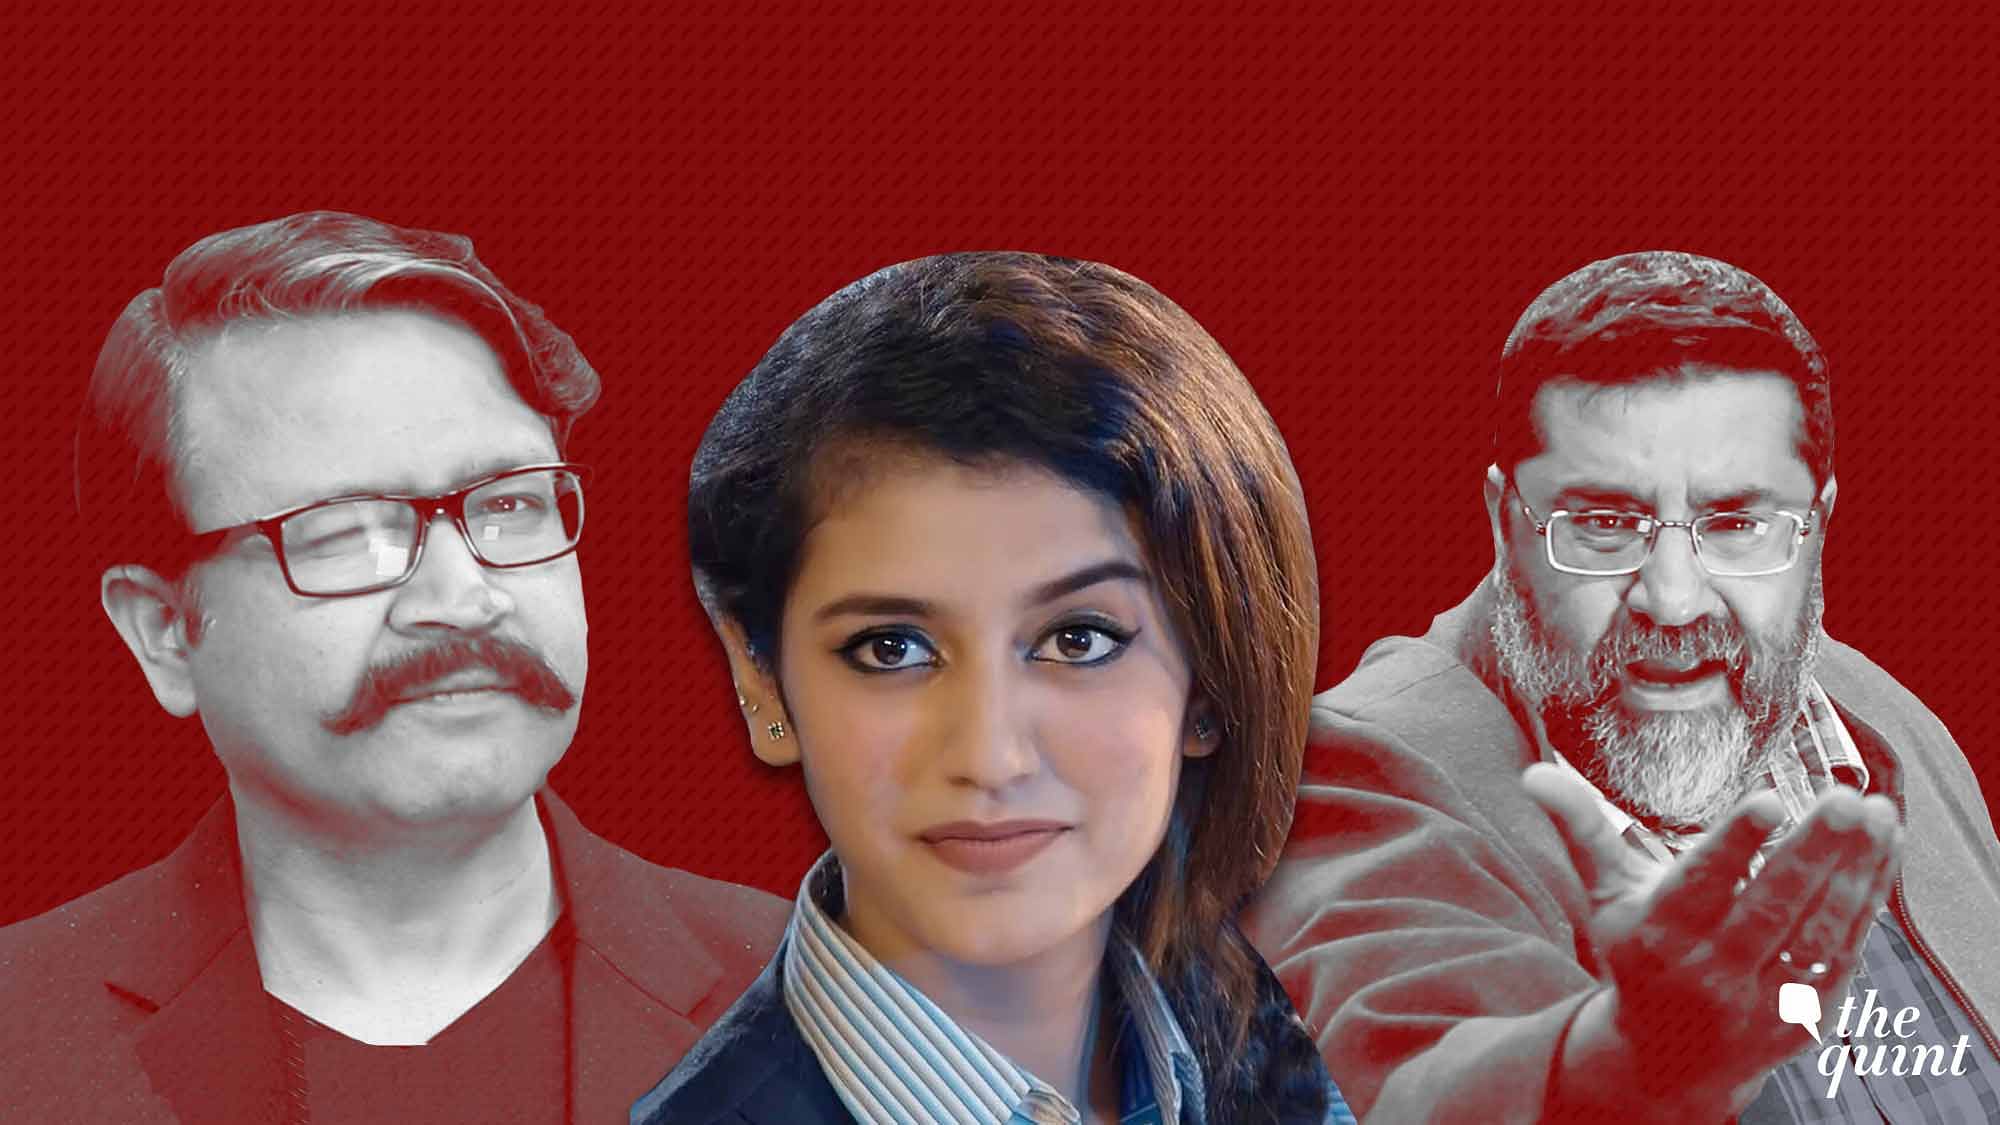 The Quint presents an EXCLUSIVE spoof on the news channel discussing Priya Prakash.